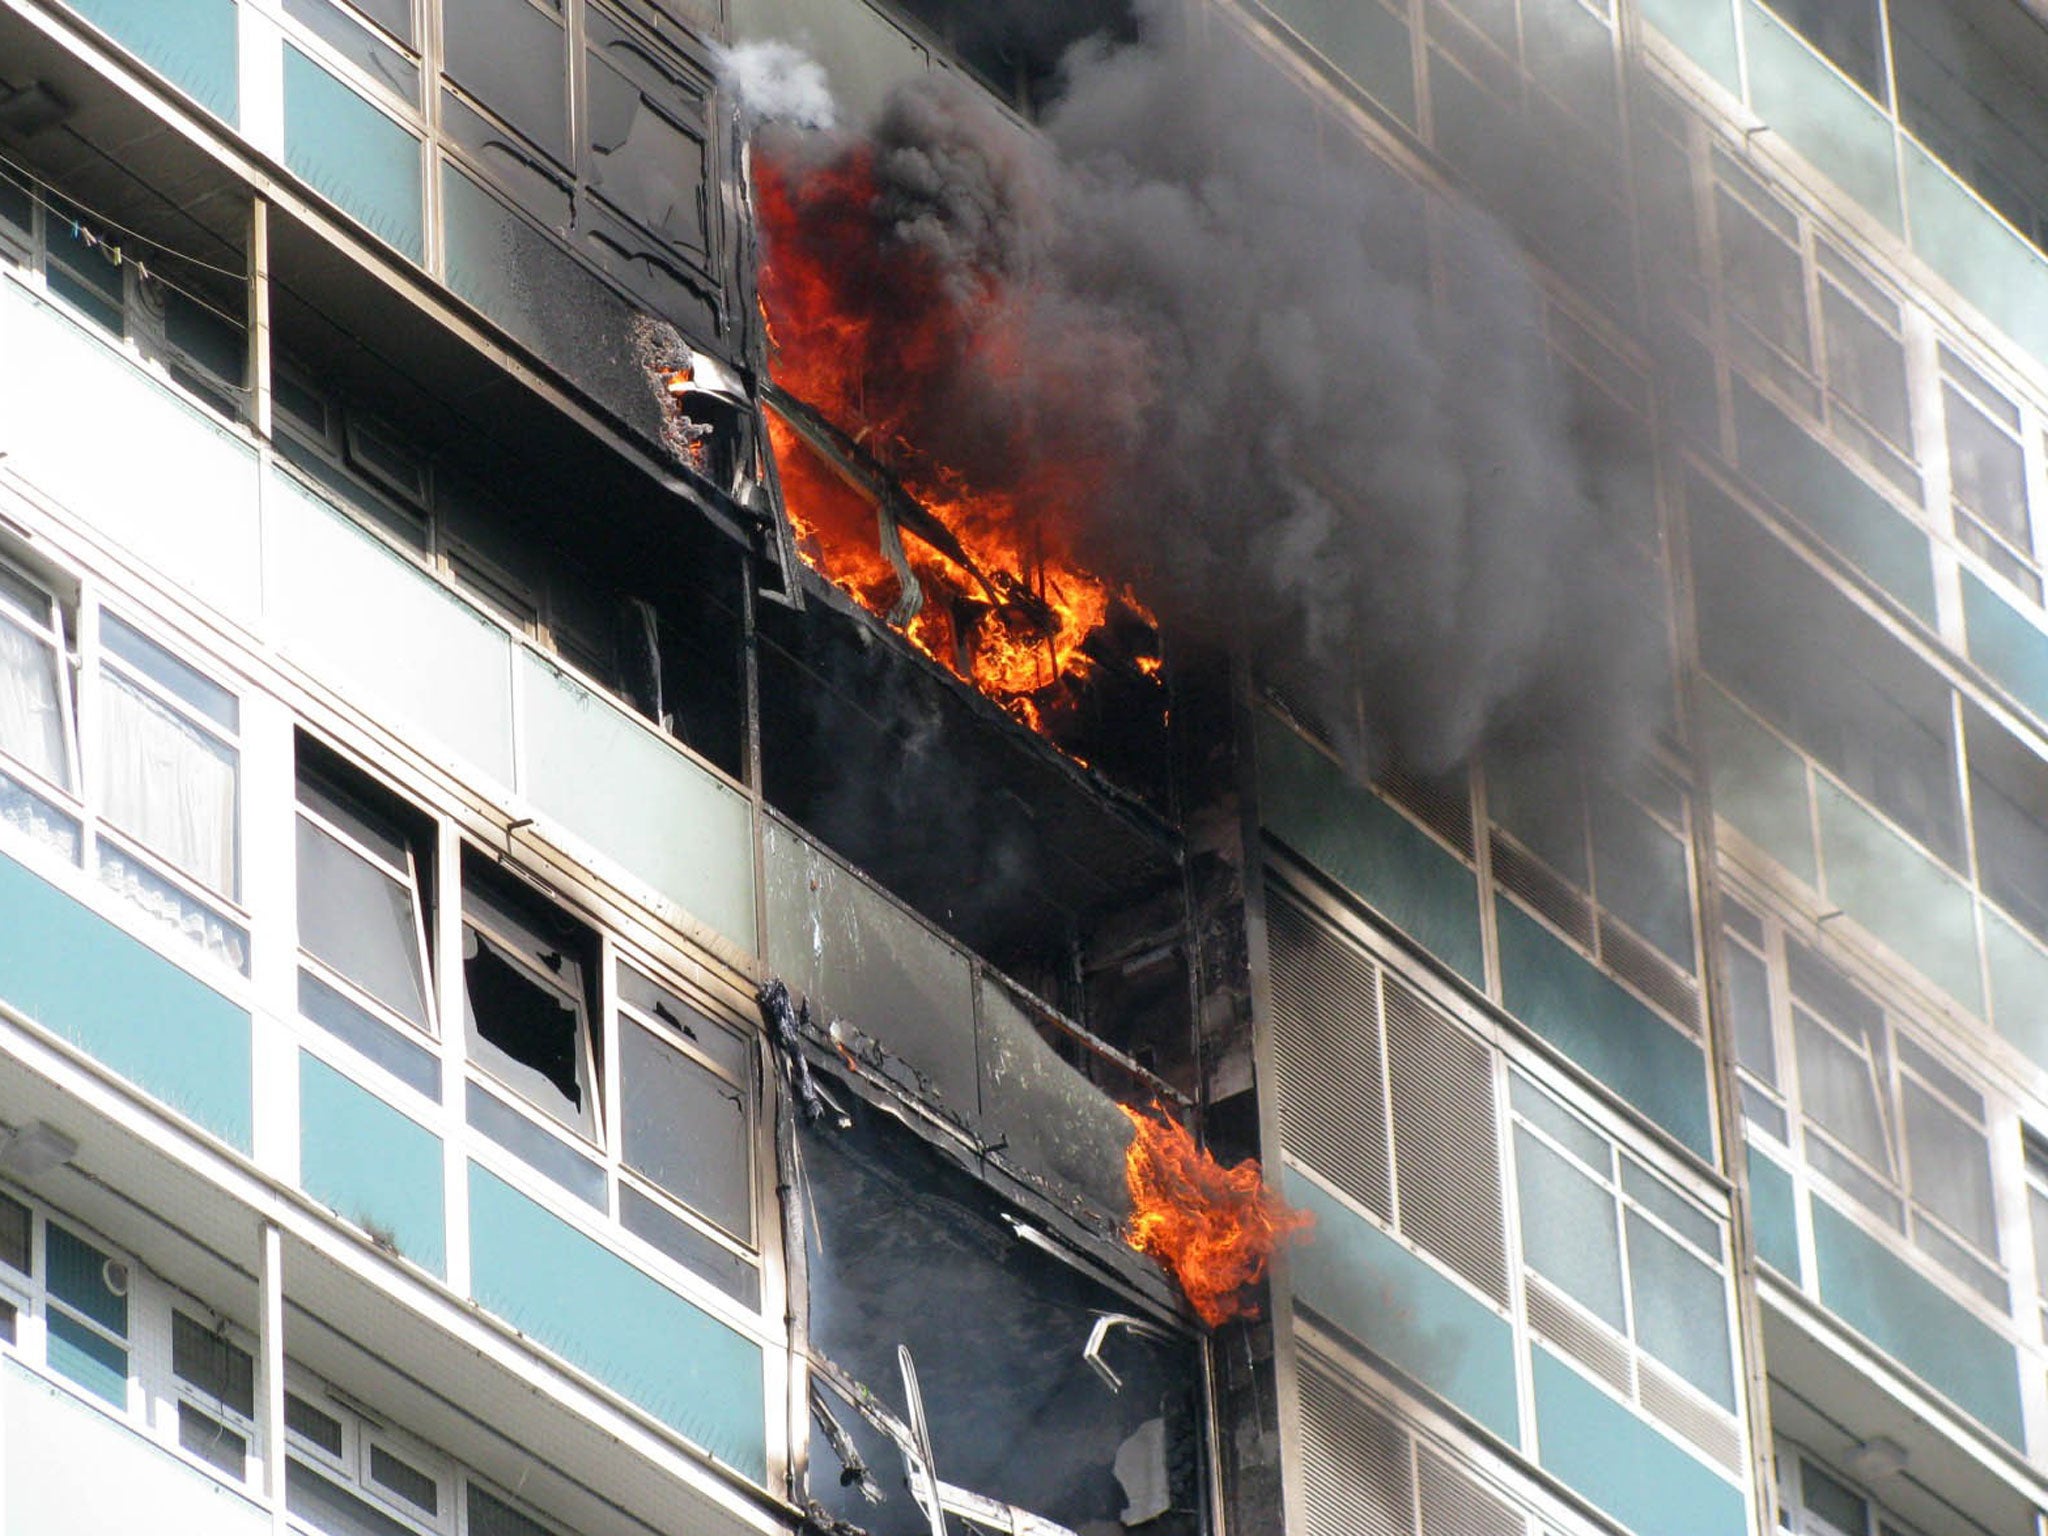 Tragedy: Lakanal House in the Sceaux Gardens estate in Camberwell, south London, which caught fire in July 2009, killing six people